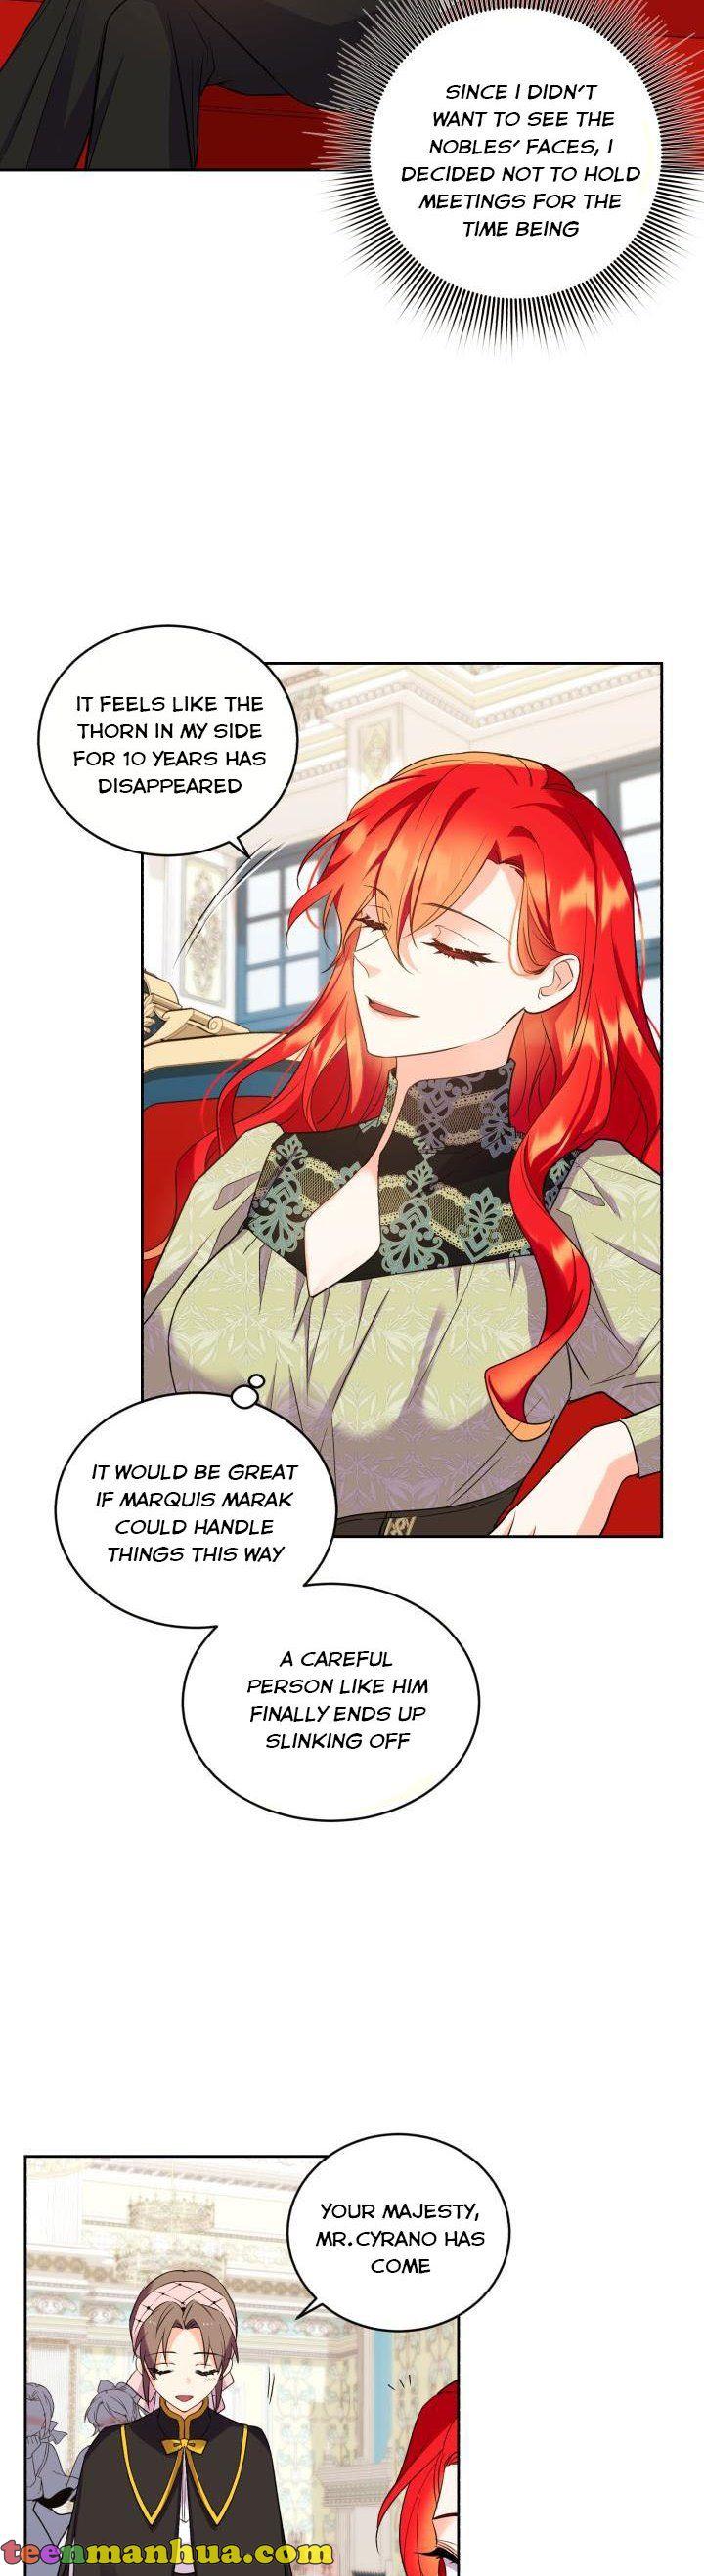 Queen, You Musn't! - chapter 51 - #2